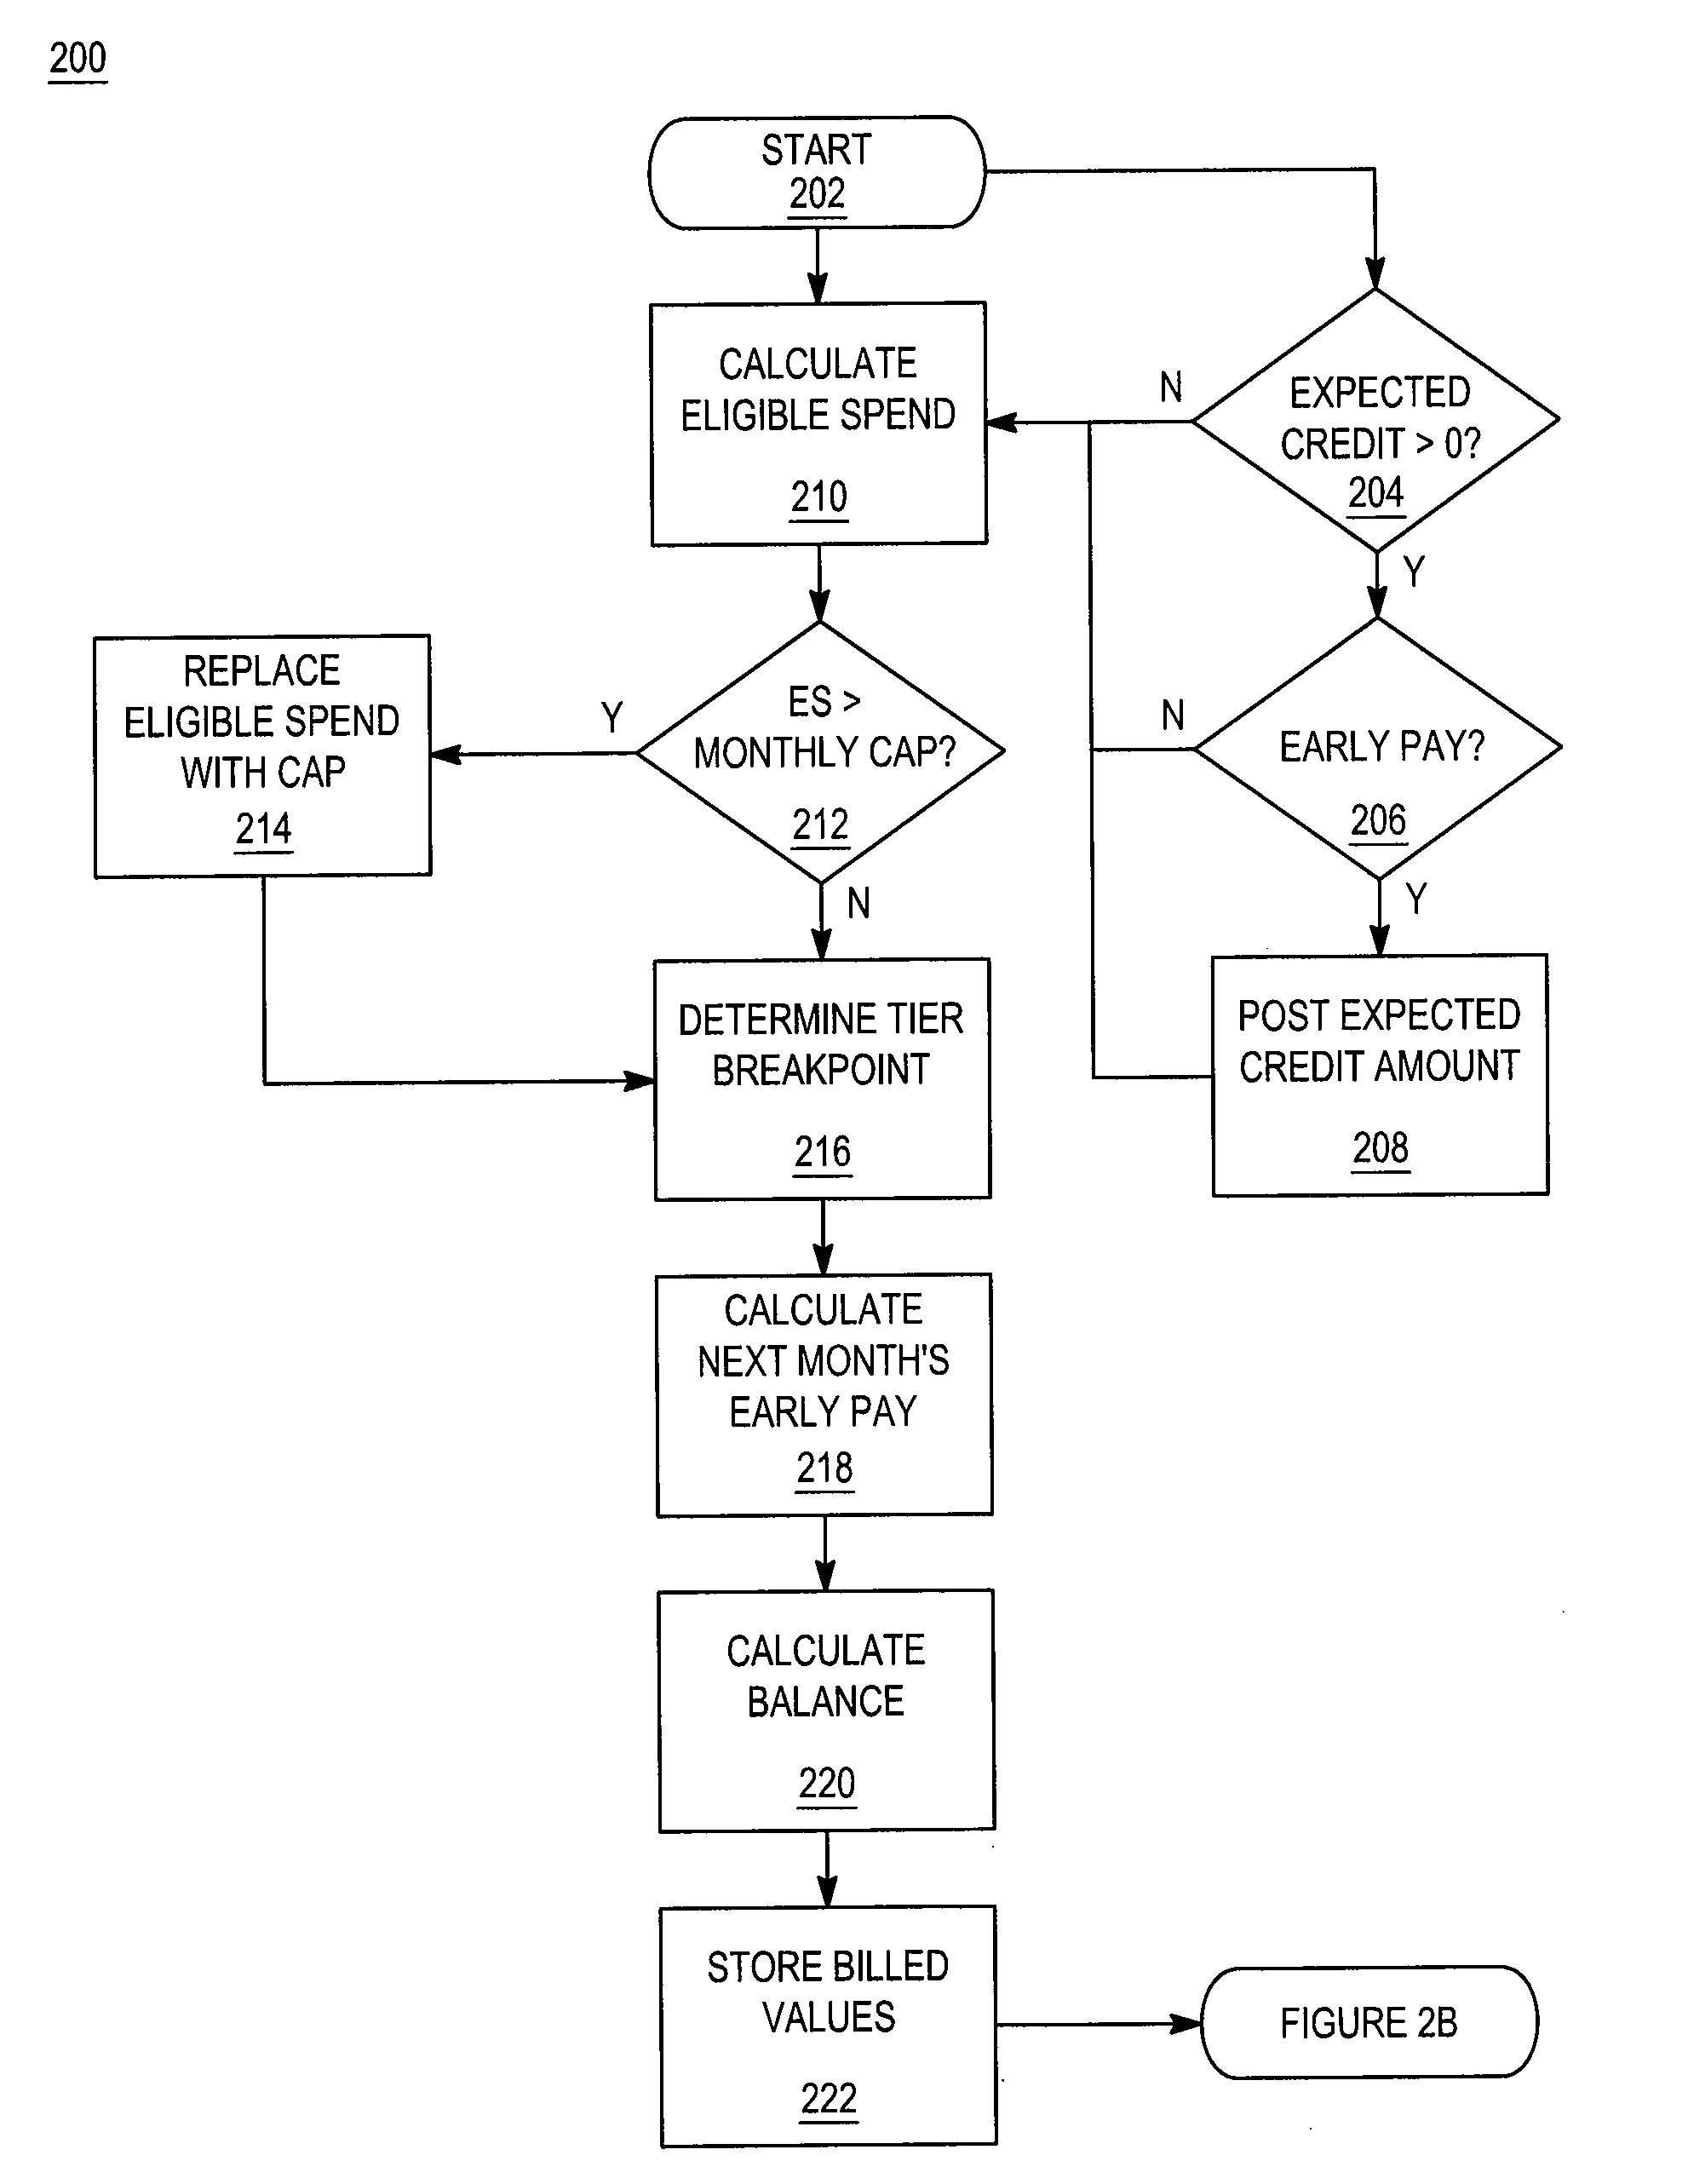 System and method for determining and affecting a change in consumer behavior